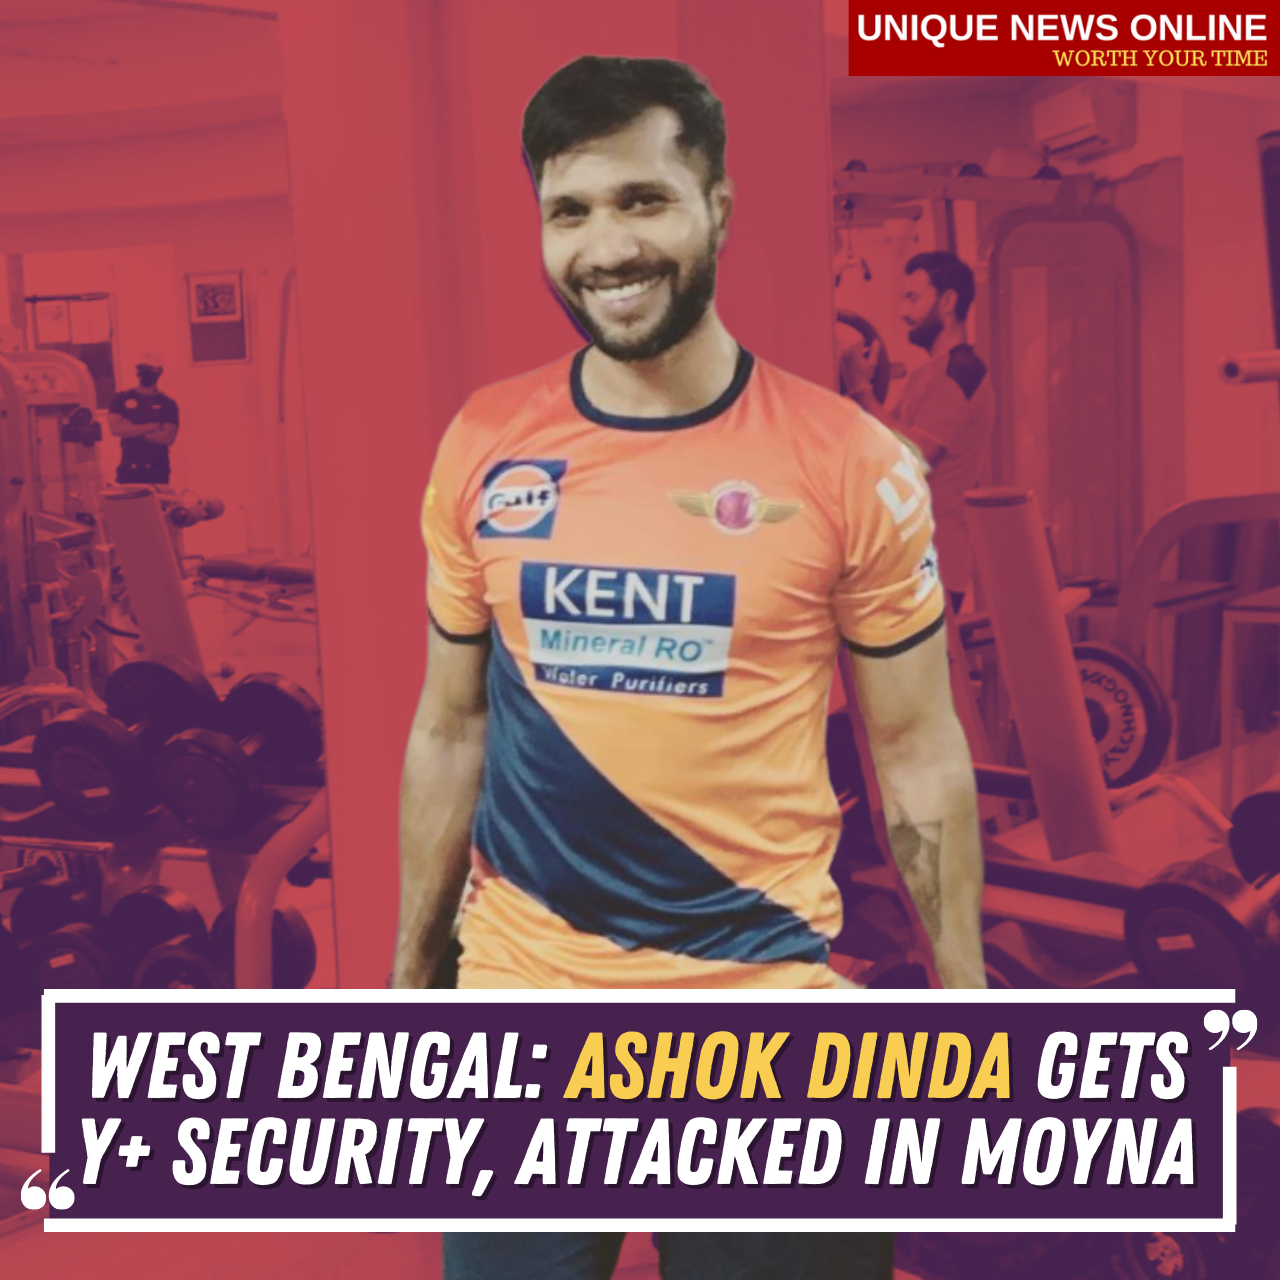 West Bengal: Former Cricketer and BJP Candidate Ashok Dinda get Y+Security, was attacked in Moyna